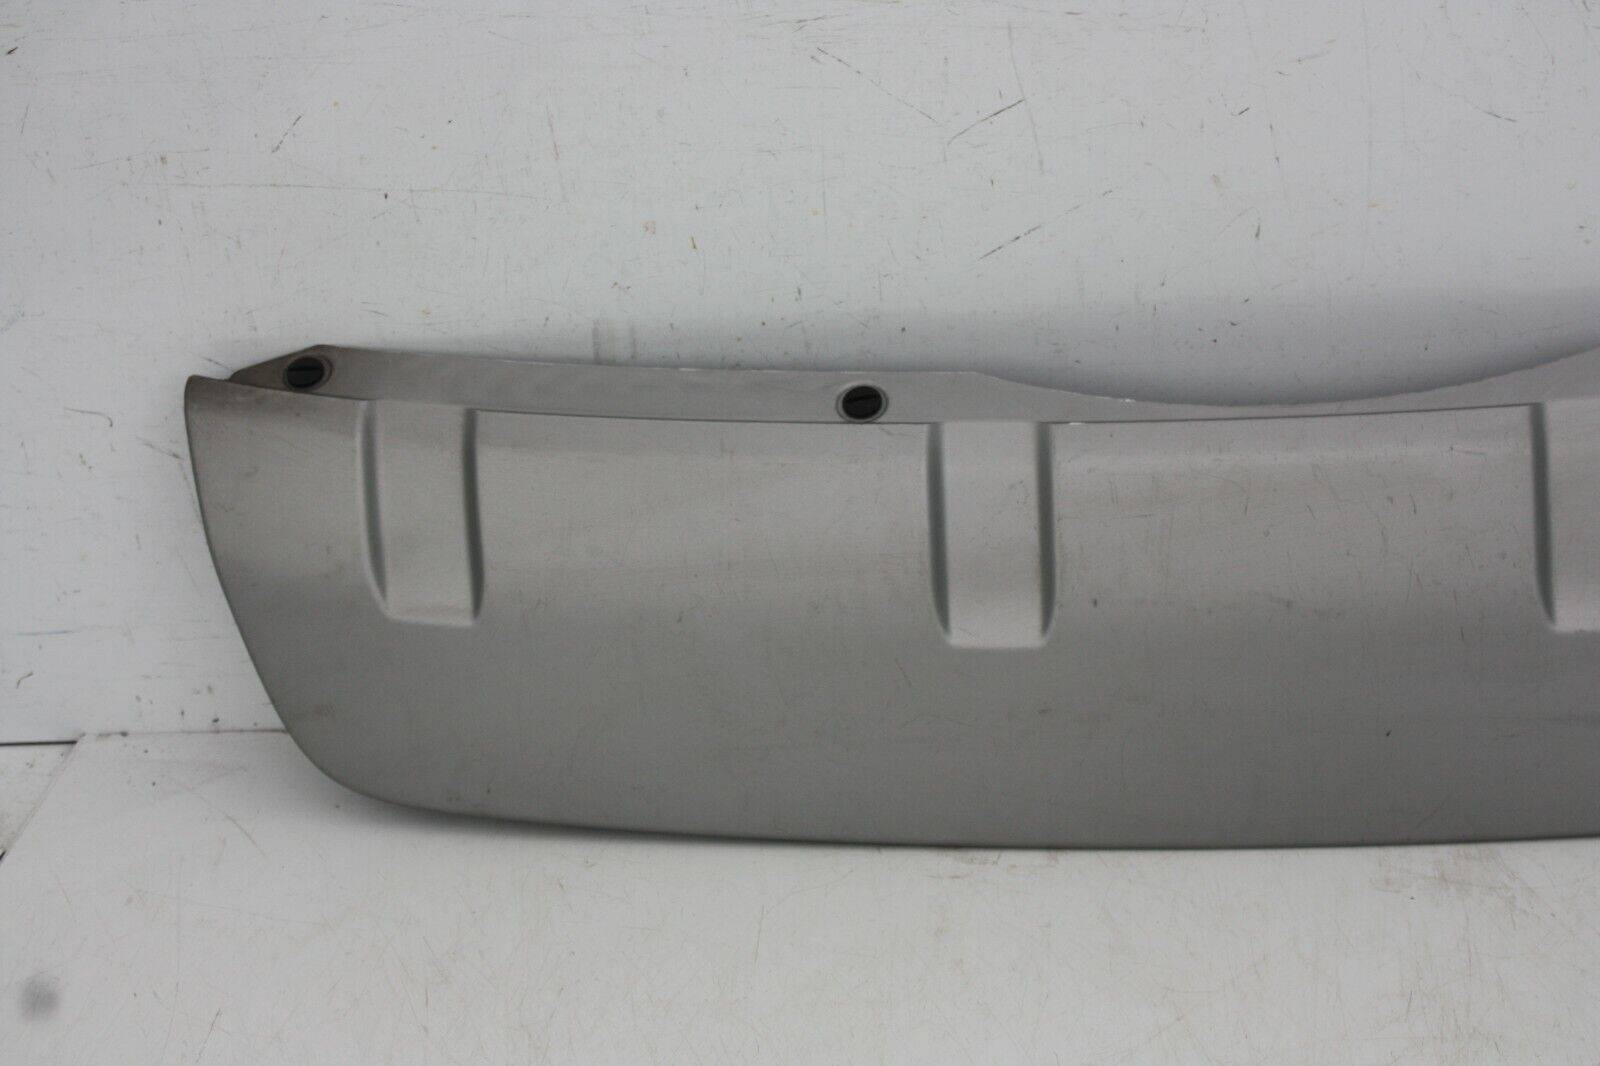 Land-Rover-Discovery-5-Rear-Bumper-Tow-Eye-Cover-2017-Onwards-Genuine-175367544144-2